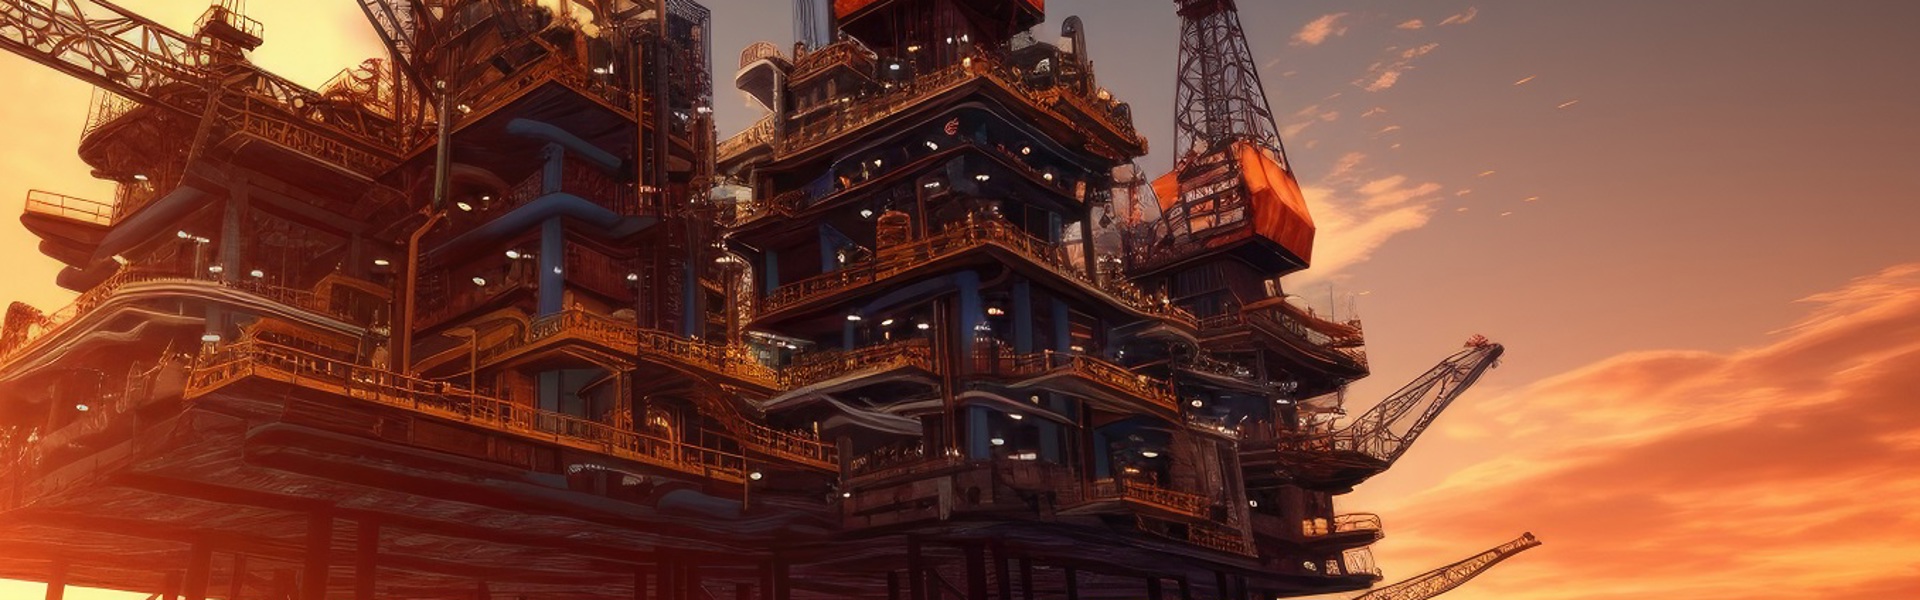 Picture of oil and gas platform